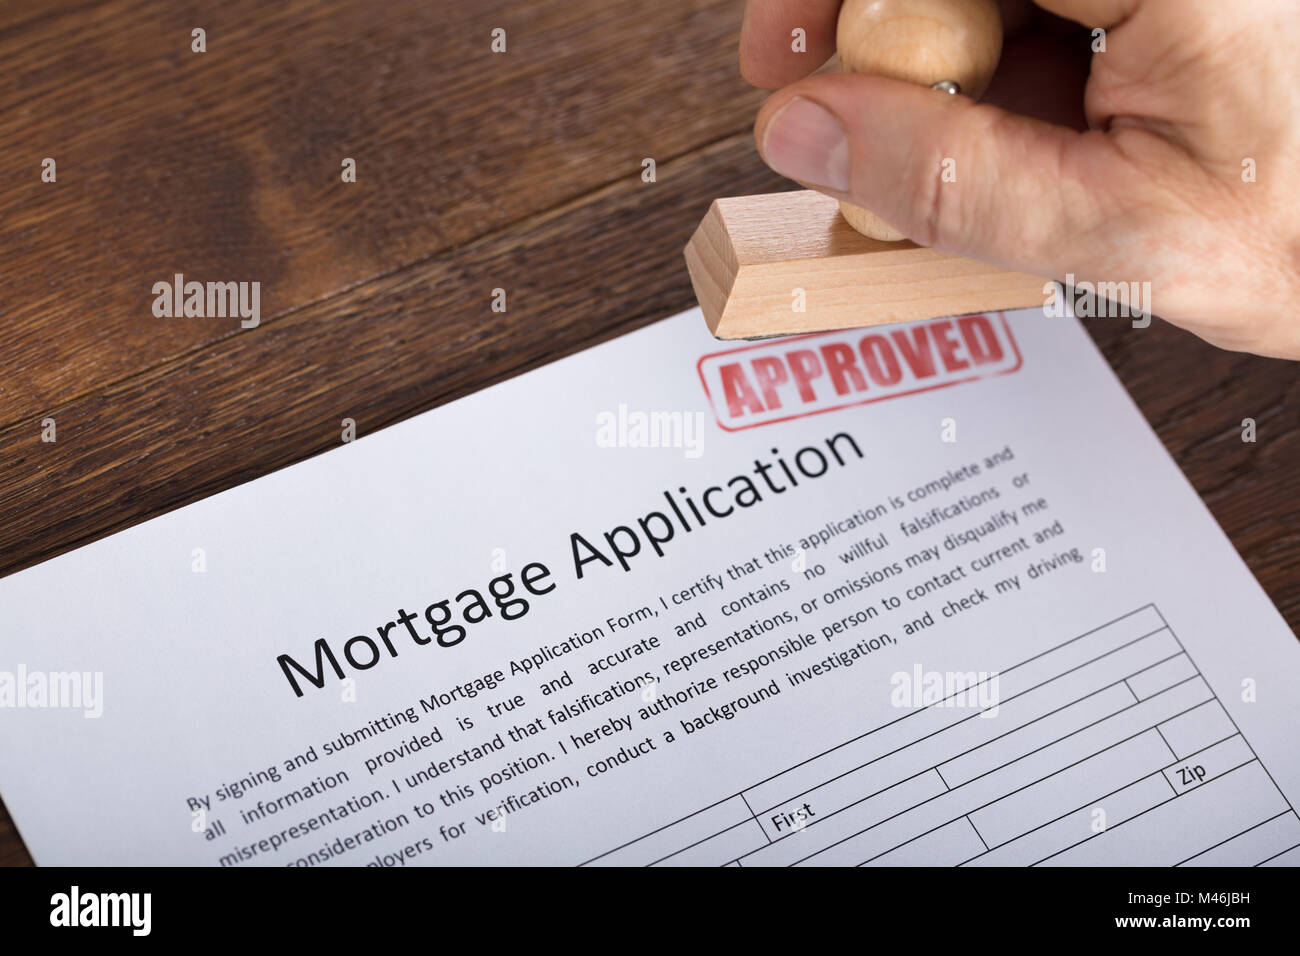 High Angle View Of An Approved Stamp On Mortgage Application Form At Wooden Desk Stock Photo